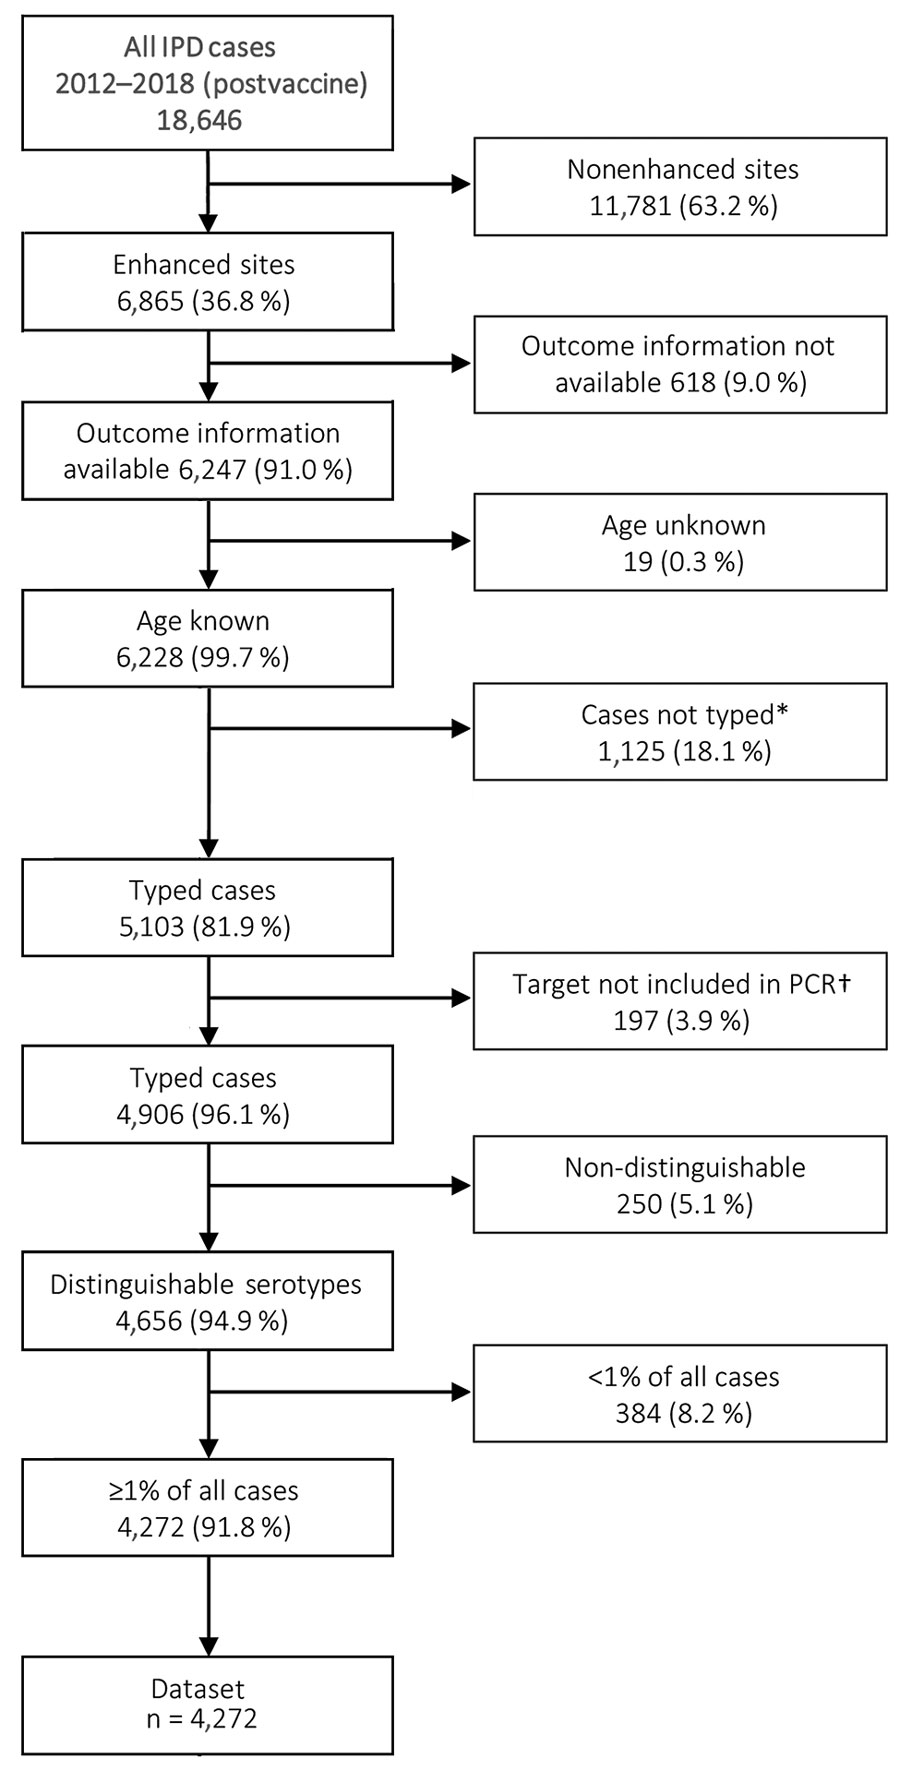 Flow diagram of cases included in the analysis of patients with IPD in South Africa, 2012–2018. Asterisk (*) indicates that cases were not typed for 1 of the following reasons: the case was identified by the laboratory information system data audits, n = 651; the sample was positive for pneumococcal antigen detection but nonviable upon culture, n = 14; the isolate was not received and thus serotyping not possible, n = 379; or sample was nonviable and PCR negative, n = 81. Dagger (†) indicates that samples for which Quellung did not yield a valid result were prepared for PCR confirmation and serotyping if PCR positive. If the multiplex PCR was negative for all 38 detectable serotypes, then the sample was excluded from analysis. IPD, invasive pneumococcal disease.